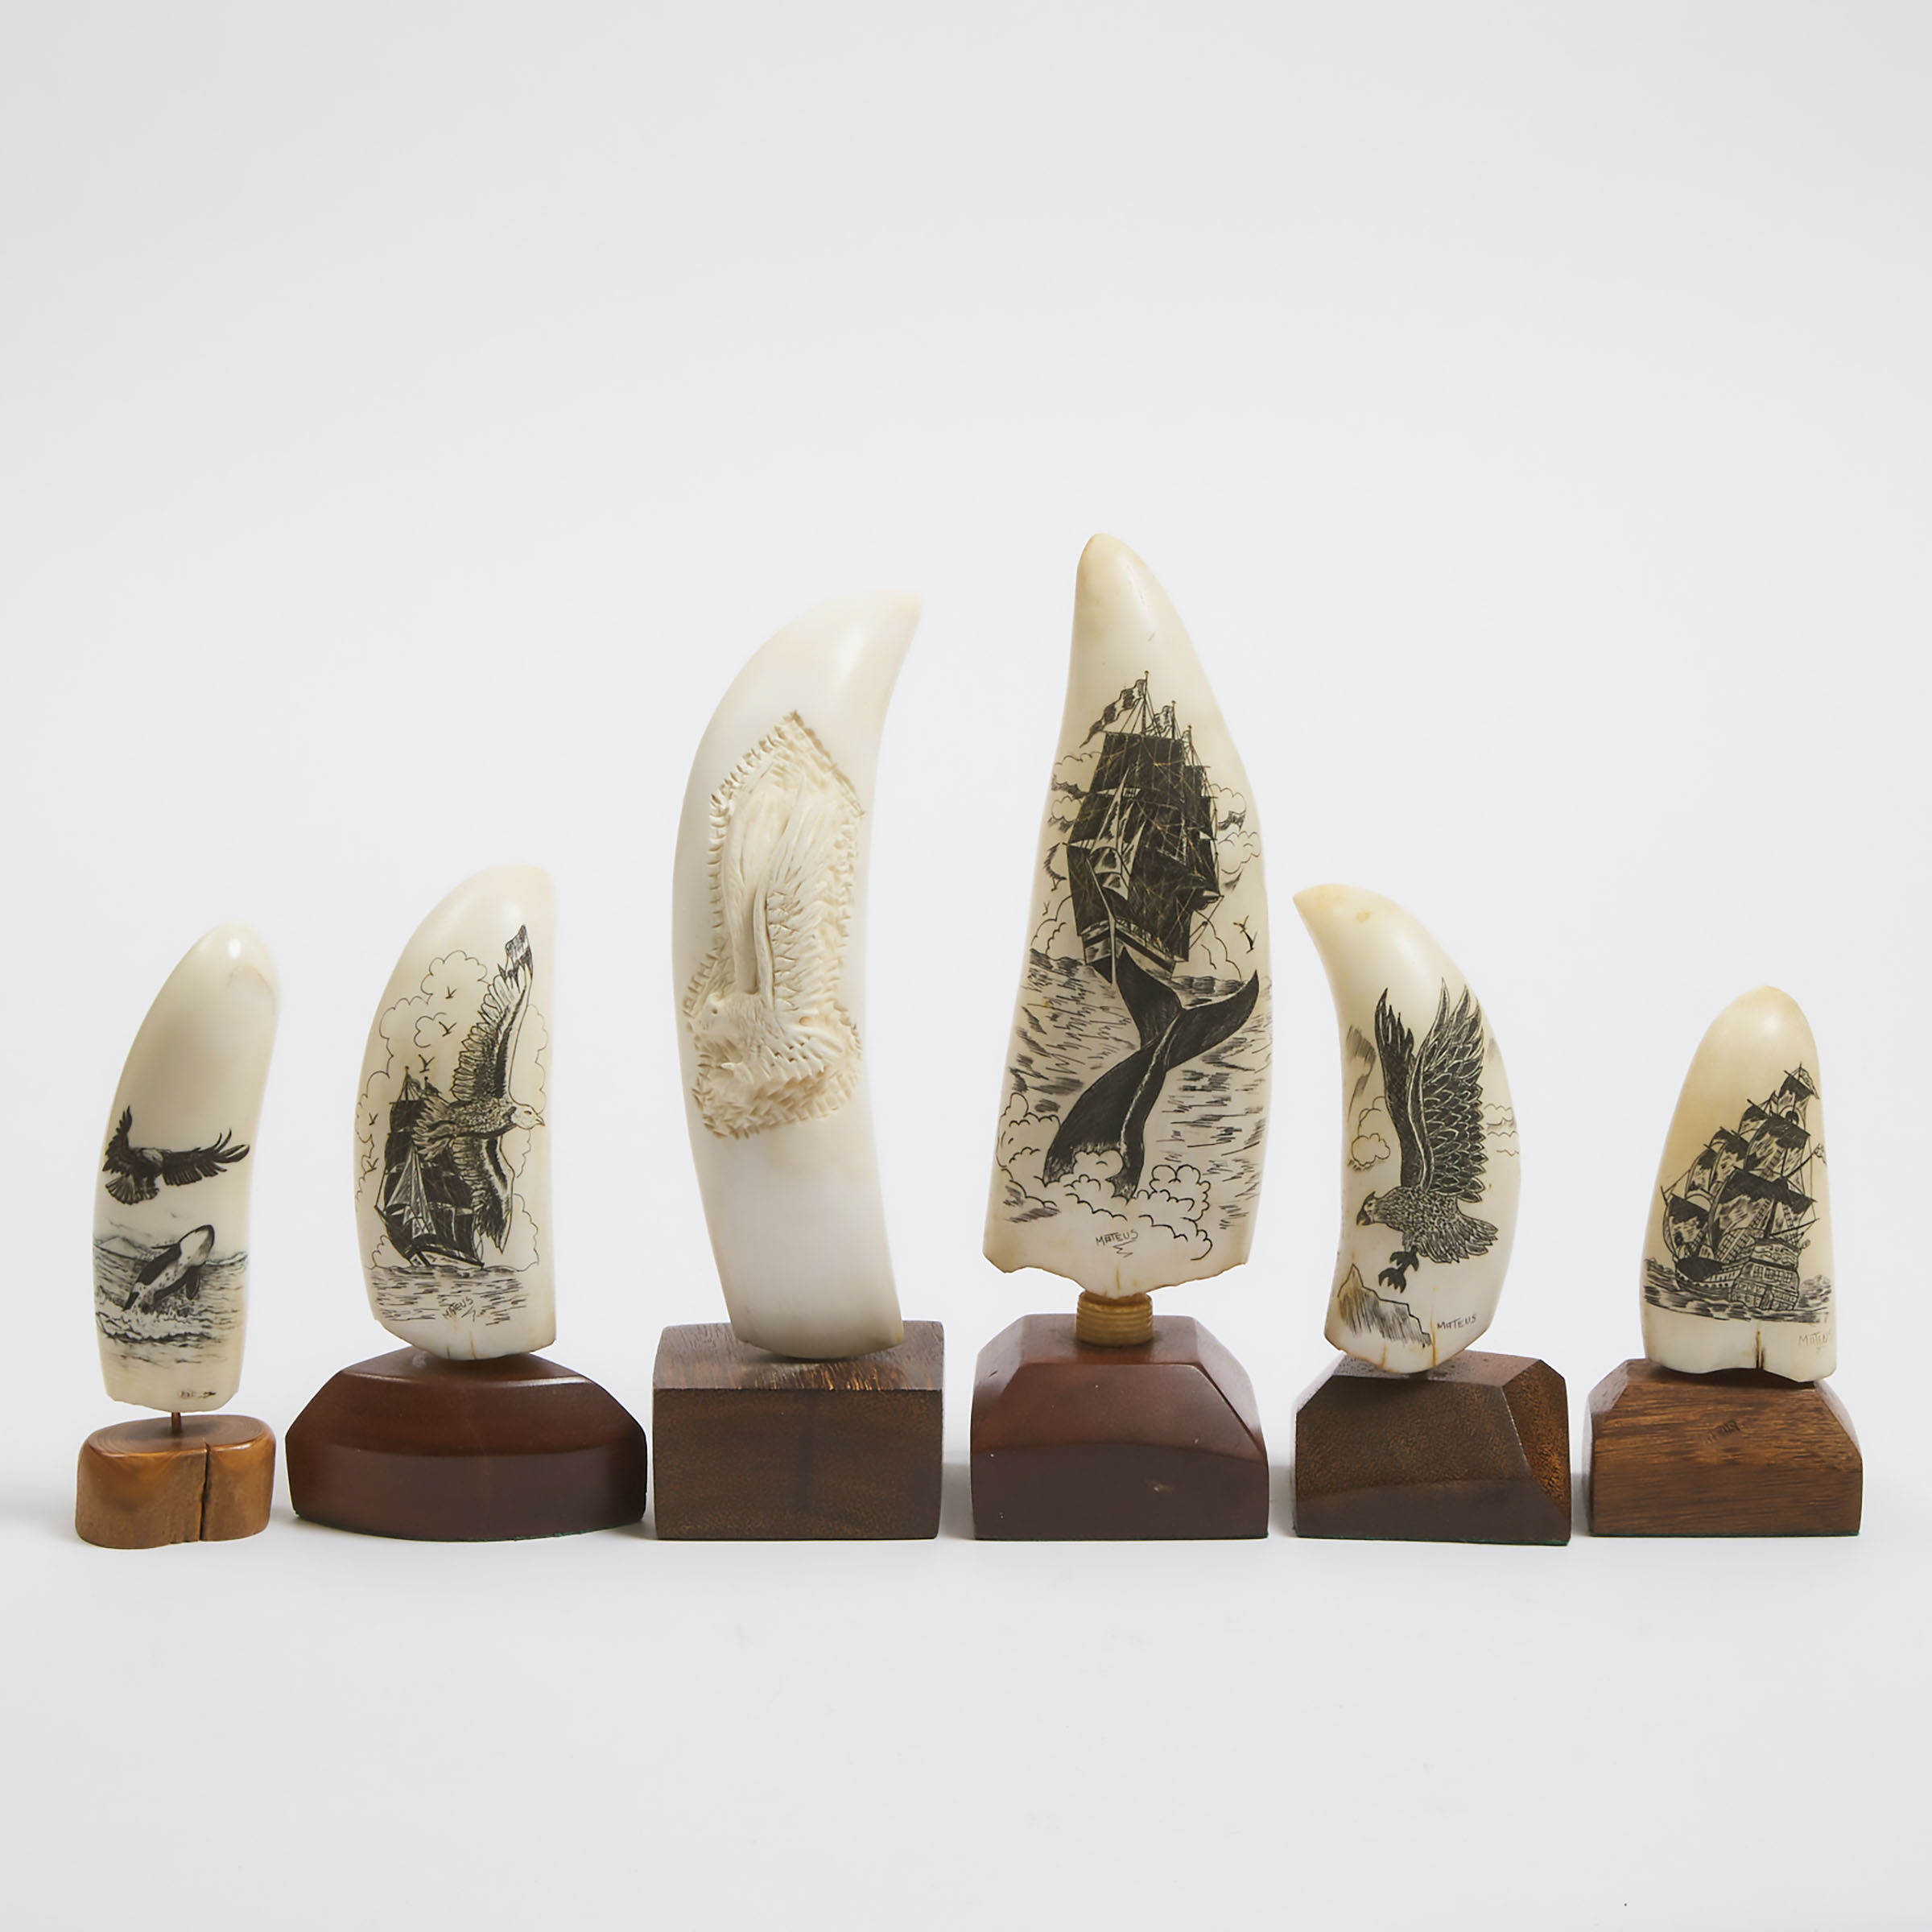 Six Scrimshawed or Carved Whale Teeth, late 20th century